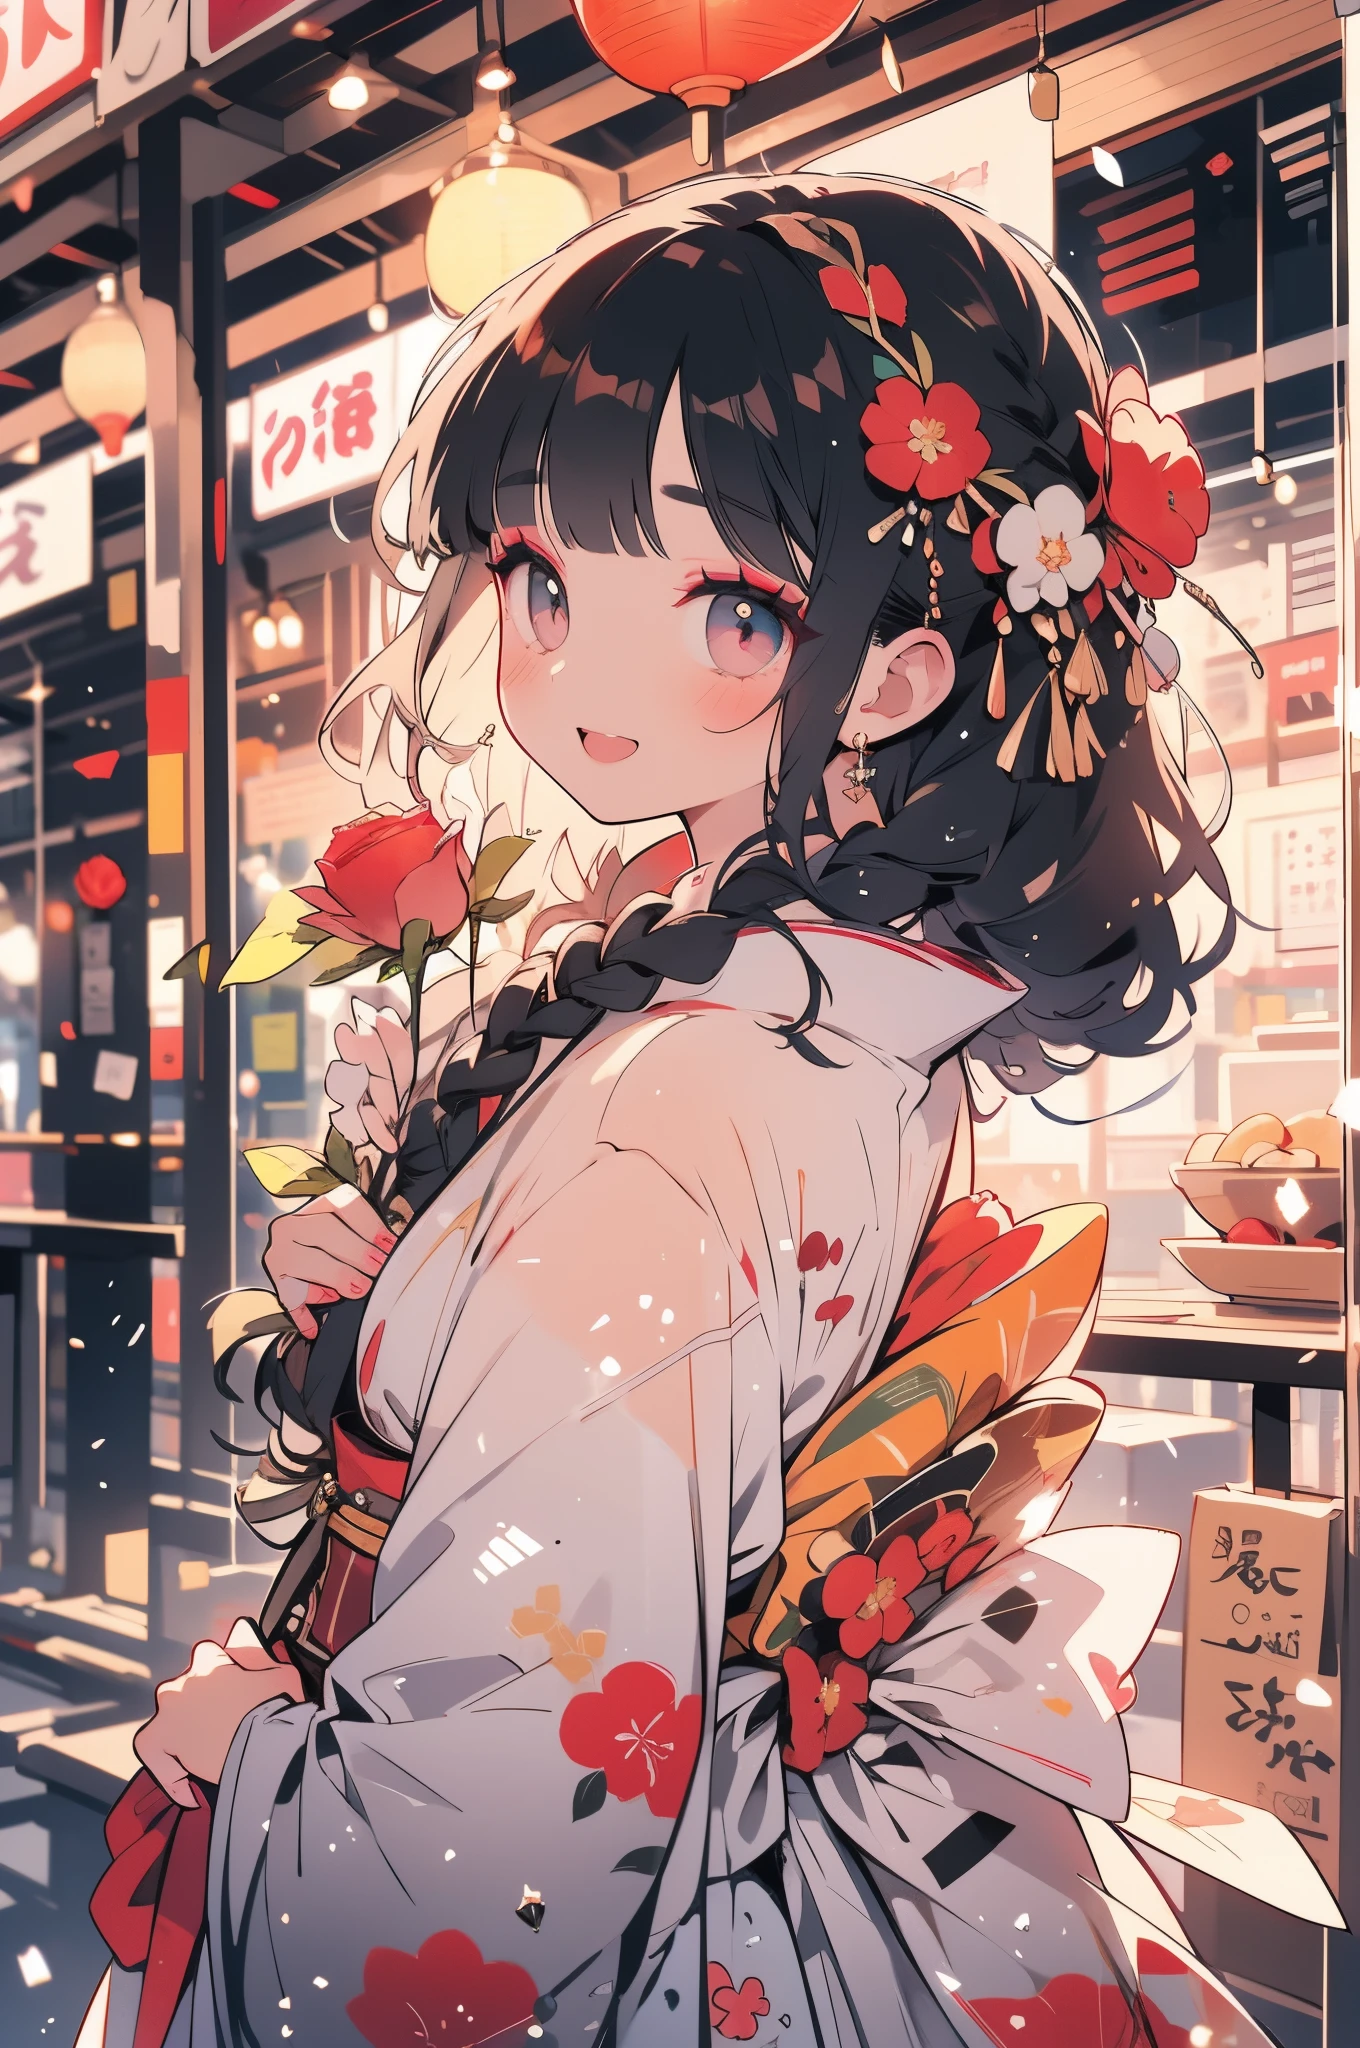 A woman wearing an arrow-patterned kimono on a cold day in Kyoto,Holding a bouquet of roses,Black hair braid gal makeup girl,red delicate makeup,the girl smiles mischievously,Long see-through bangs with parted bangs